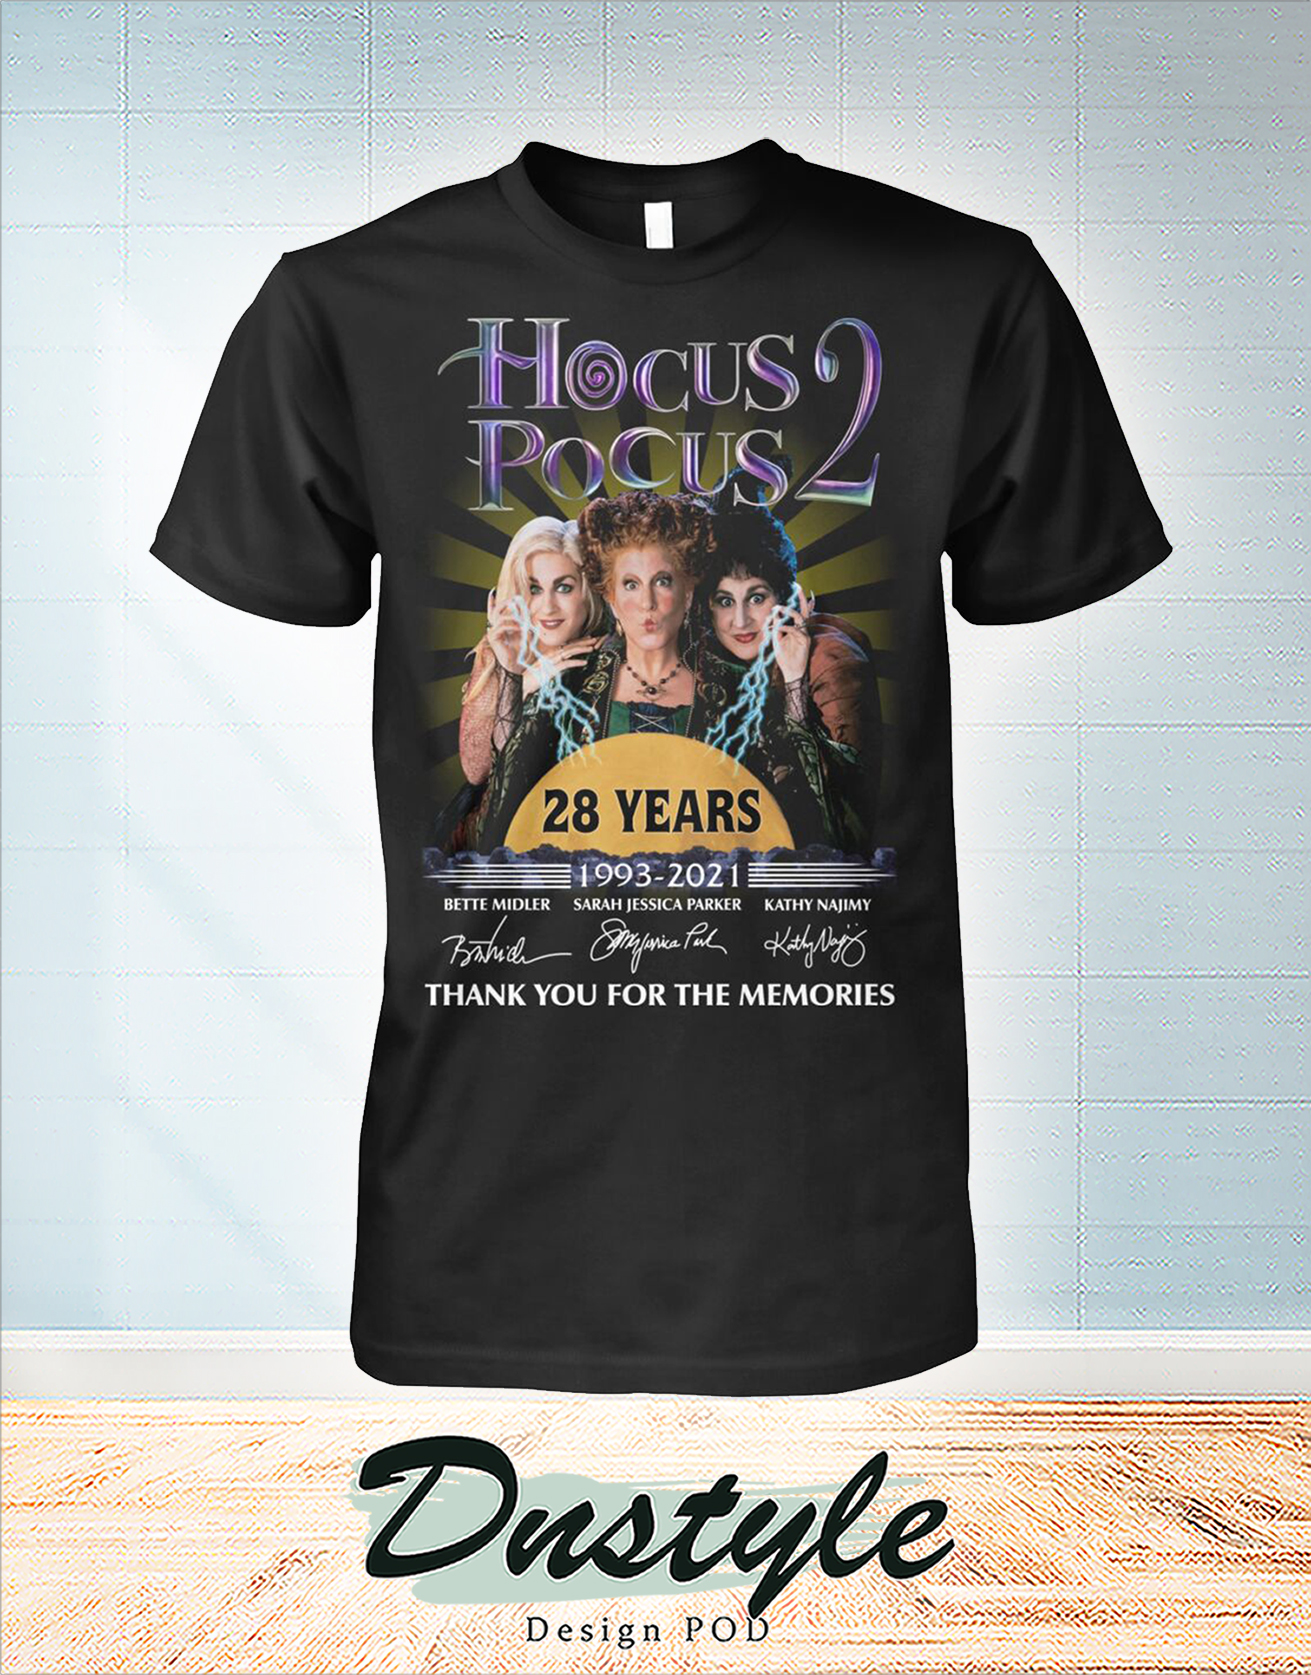 Hocus pocus 28 years thank you for the memories t-shirt